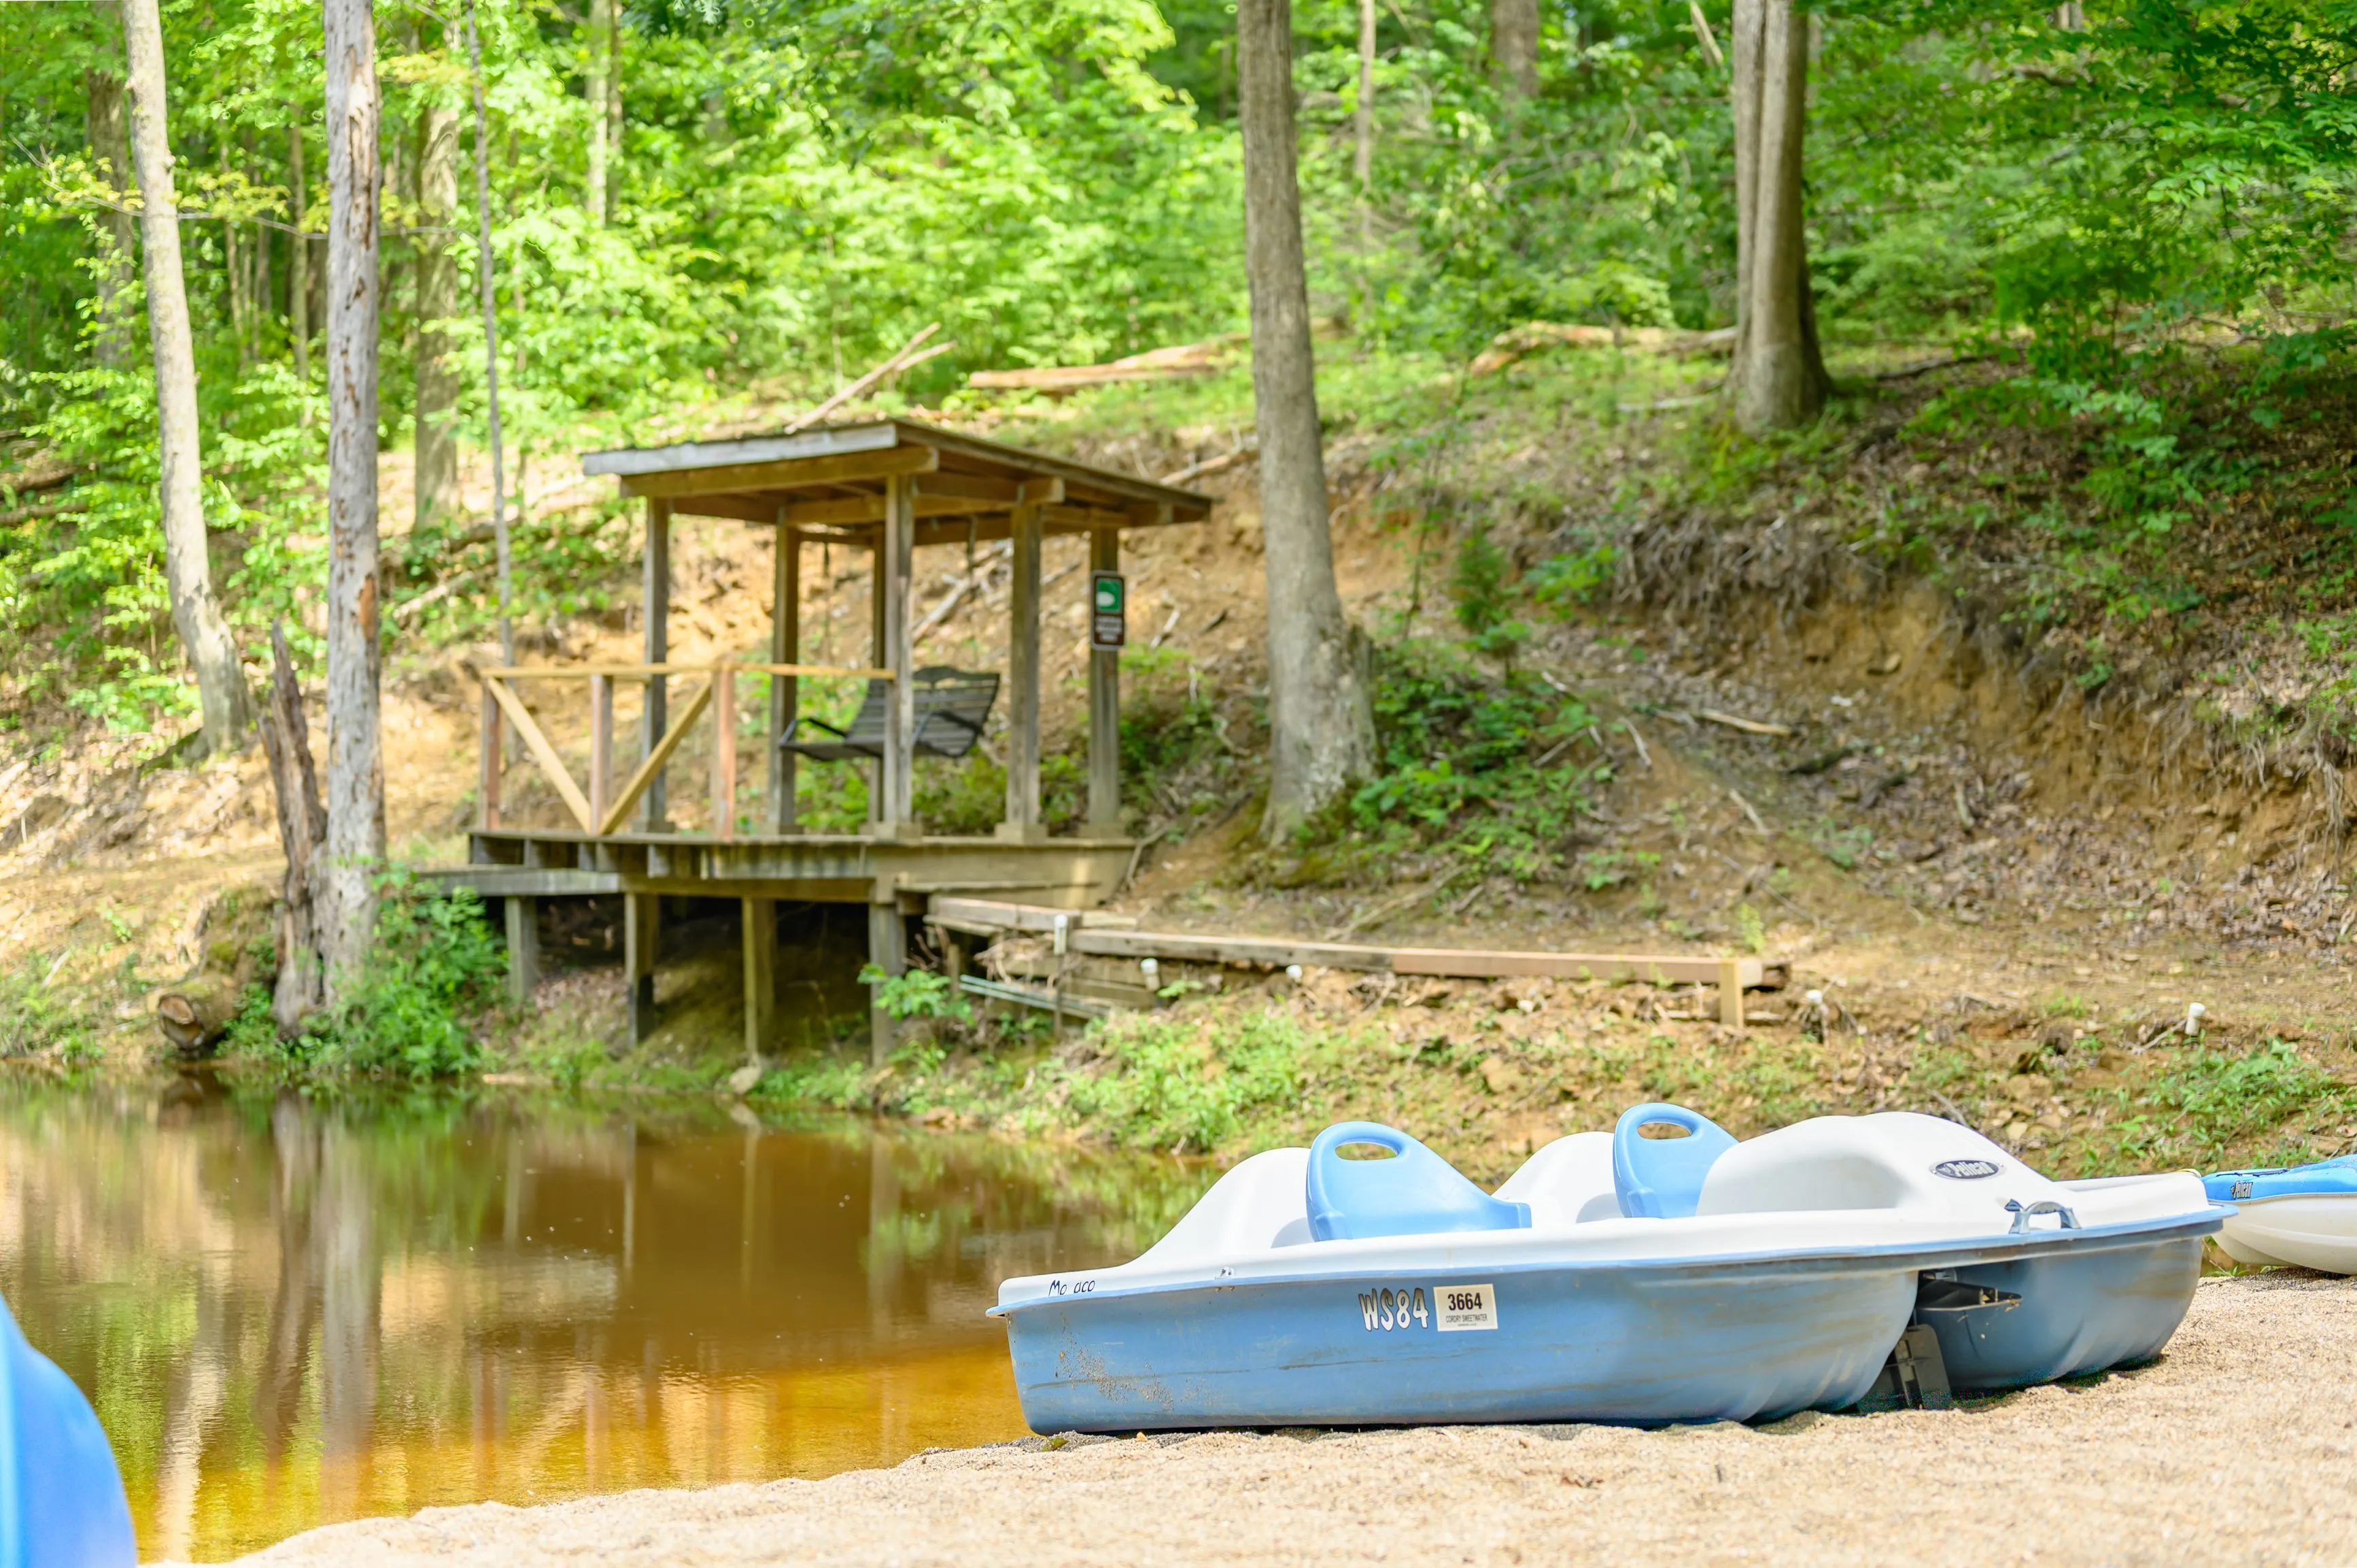 Paddle boats on the shore of a serene pond with a wooden gazebo in a forested area.